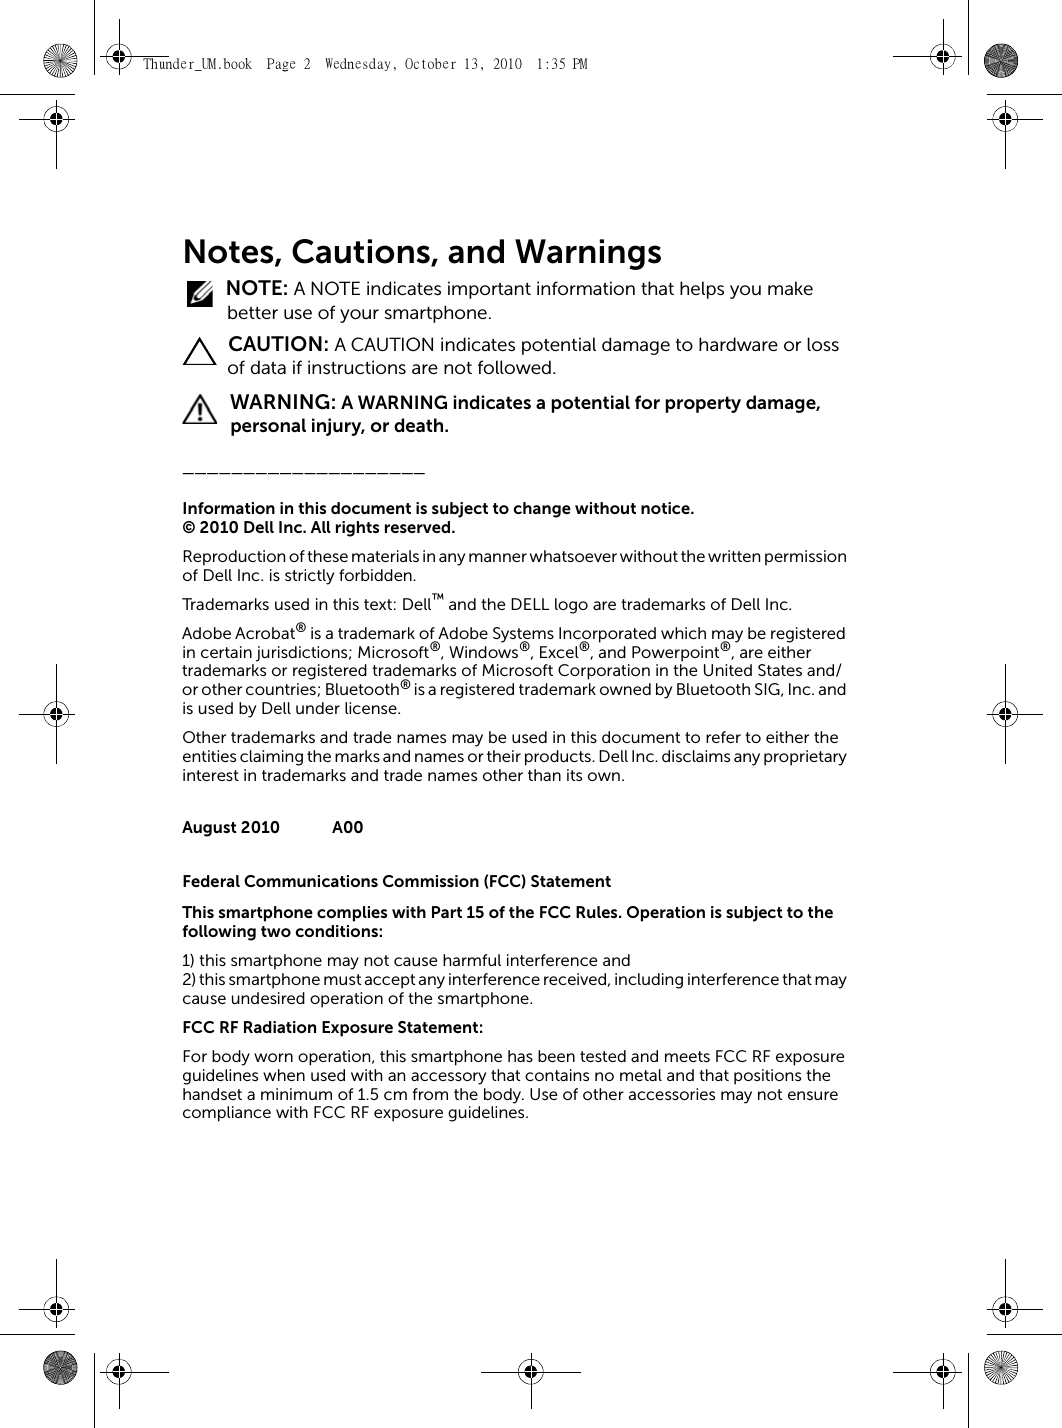 Notes, Cautions, and Warnings NOTE: A NOTE indicates important information that helps you make better use of your smartphone. CAUTION: A CAUTION indicates potential damage to hardware or loss of data if instructions are not followed. WARNING: A WARNING indicates a potential for property damage, personal injury, or death.____________________Information in this document is subject to change without notice.© 2010 Dell Inc. All rights reserved.Reproduction of these materials in any manner whatsoever without the written permission of Dell Inc. is strictly forbidden.Trademarks used in this text: Dell™ and the DELL logo are trademarks of Dell Inc.Adobe Acrobat® is a trademark of Adobe Systems Incorporated which may be registered in certain jurisdictions; Microsoft®, Windows®, Excel®, and Powerpoint®, are either trademarks or registered trademarks of Microsoft Corporation in the United States and/or other countries; Bluetooth® is a registered trademark owned by Bluetooth SIG, Inc. and is used by Dell under license.Other trademarks and trade names may be used in this document to refer to either the entities claiming the marks and names or their products. Dell Inc. disclaims any proprietary interest in trademarks and trade names other than its own.August 2010 A00Federal Communications Commission (FCC) StatementThis smartphone complies with Part 15 of the FCC Rules. Operation is subject to the following two conditions:1) this smartphone may not cause harmful interference and2) this smartphone must accept any interference received, including interference that may cause undesired operation of the smartphone.FCC RF Radiation Exposure Statement:For body worn operation, this smartphone has been tested and meets FCC RF exposure guidelines when used with an accessory that contains no metal and that positions the handset a minimum of 1.5 cm from the body. Use of other accessories may not ensure compliance with FCC RF exposure guidelines.Thunder_UM.book  Page 2  Wednesday, October 13, 2010  1:35 PM